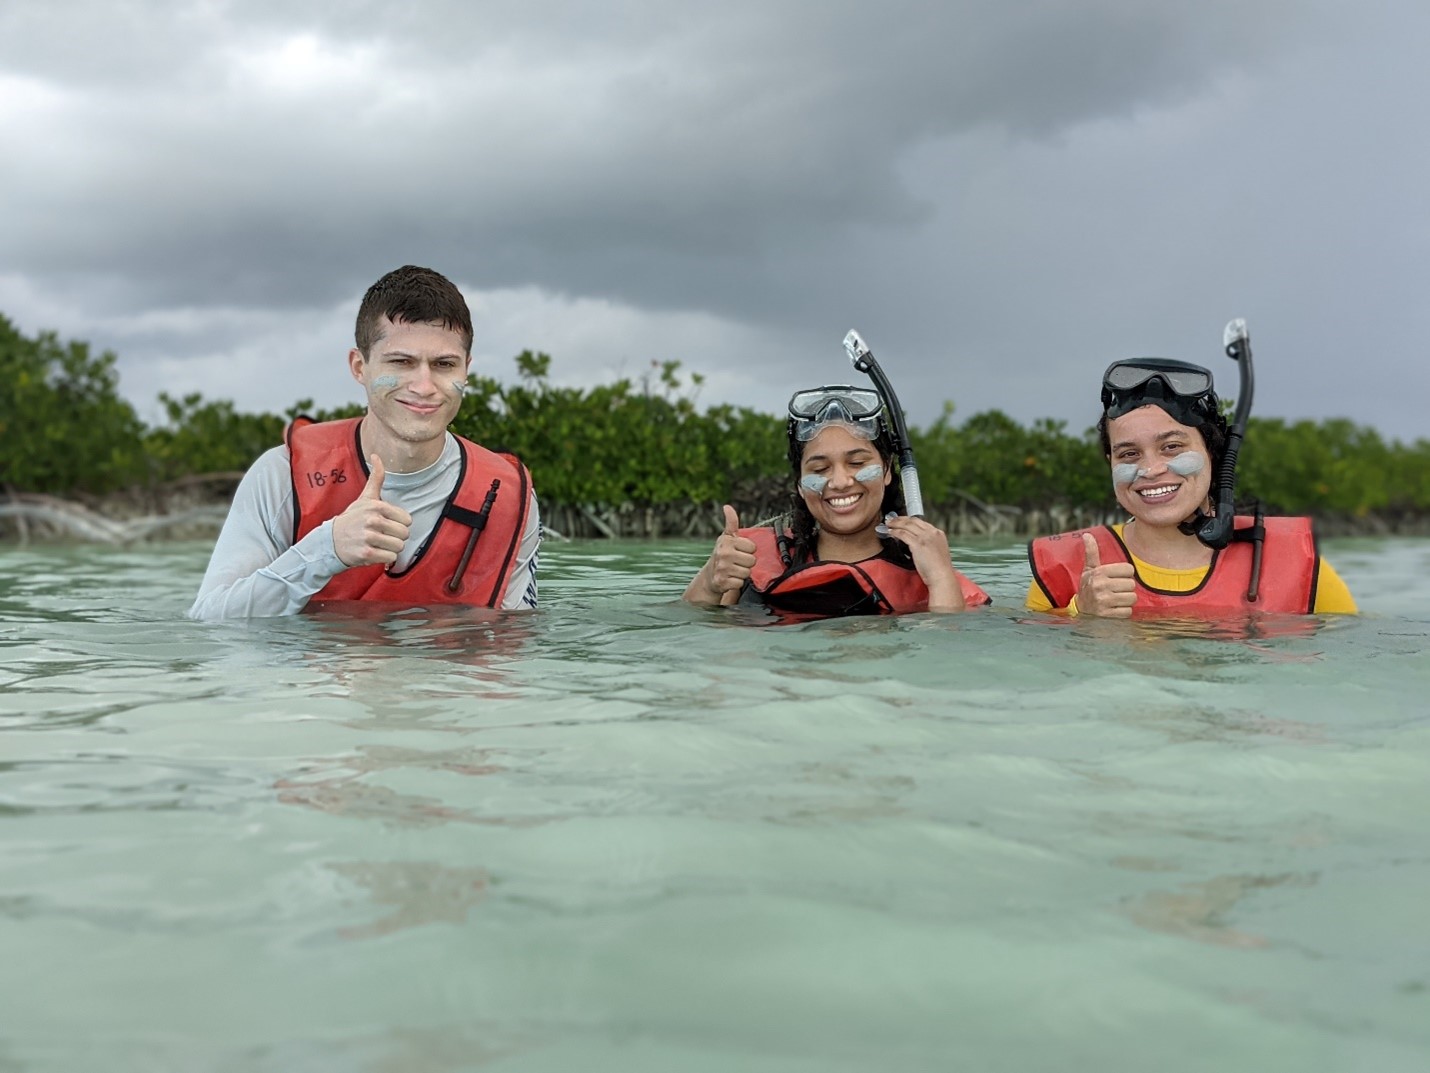 Geology undergraduate students (from left to right) Dennis Zakowicz, Barbara Reyes, and Bronte Heerdink snorkel in the tidal channel and paint their faces with carbonate mud.